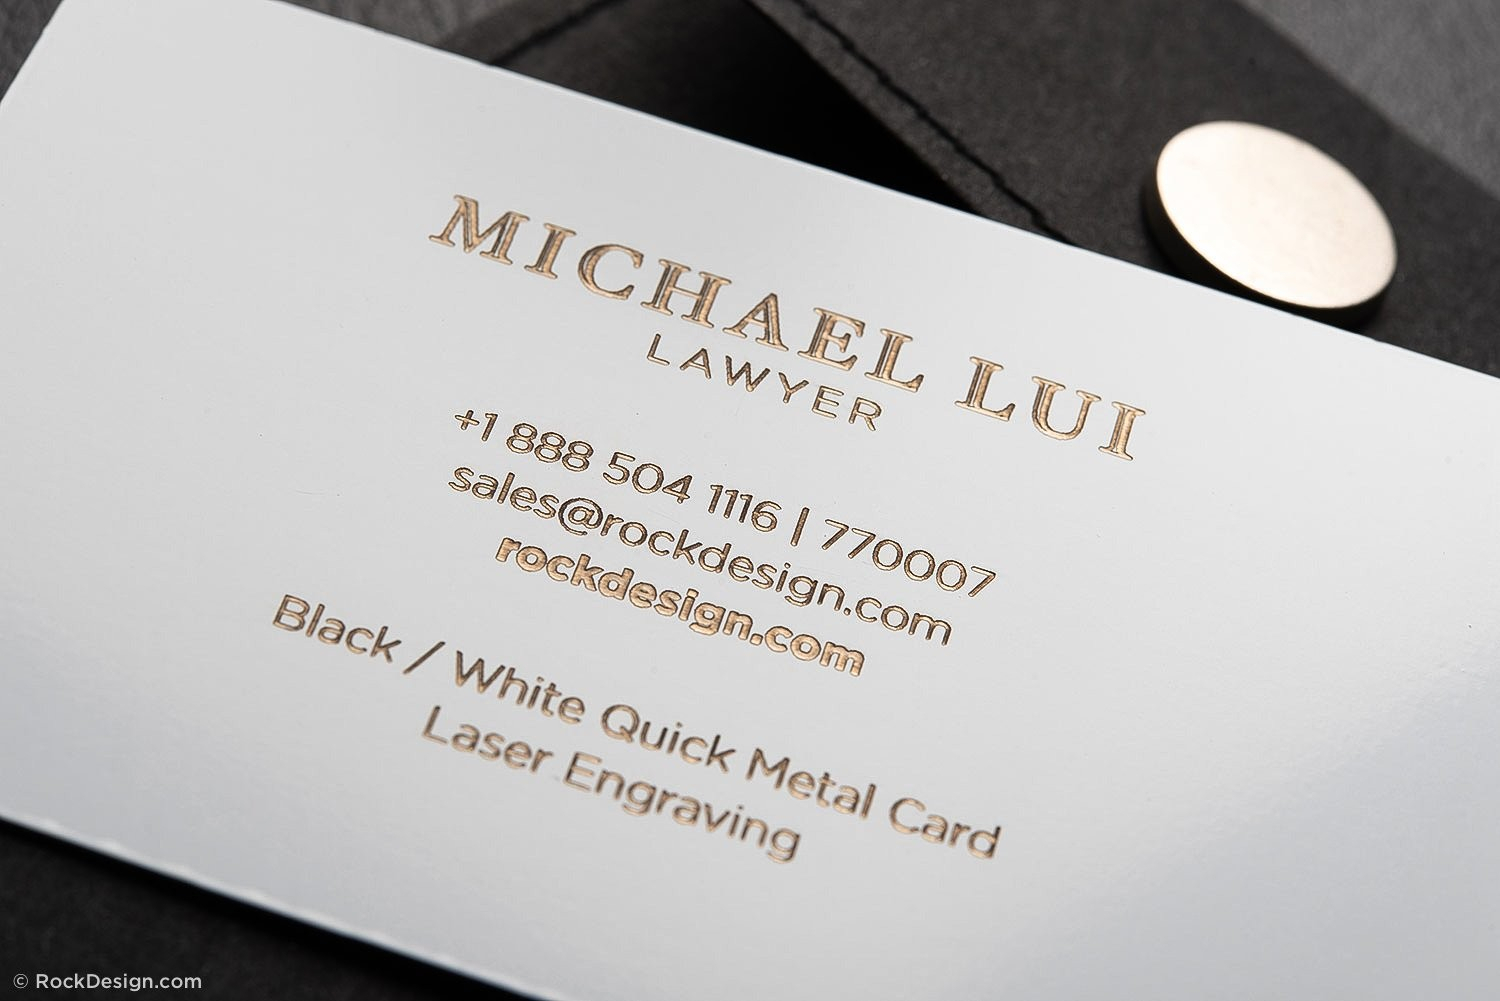 Lawyer Business Cards Templates | Creative Atoms Within Lawyer Business Cards Templates